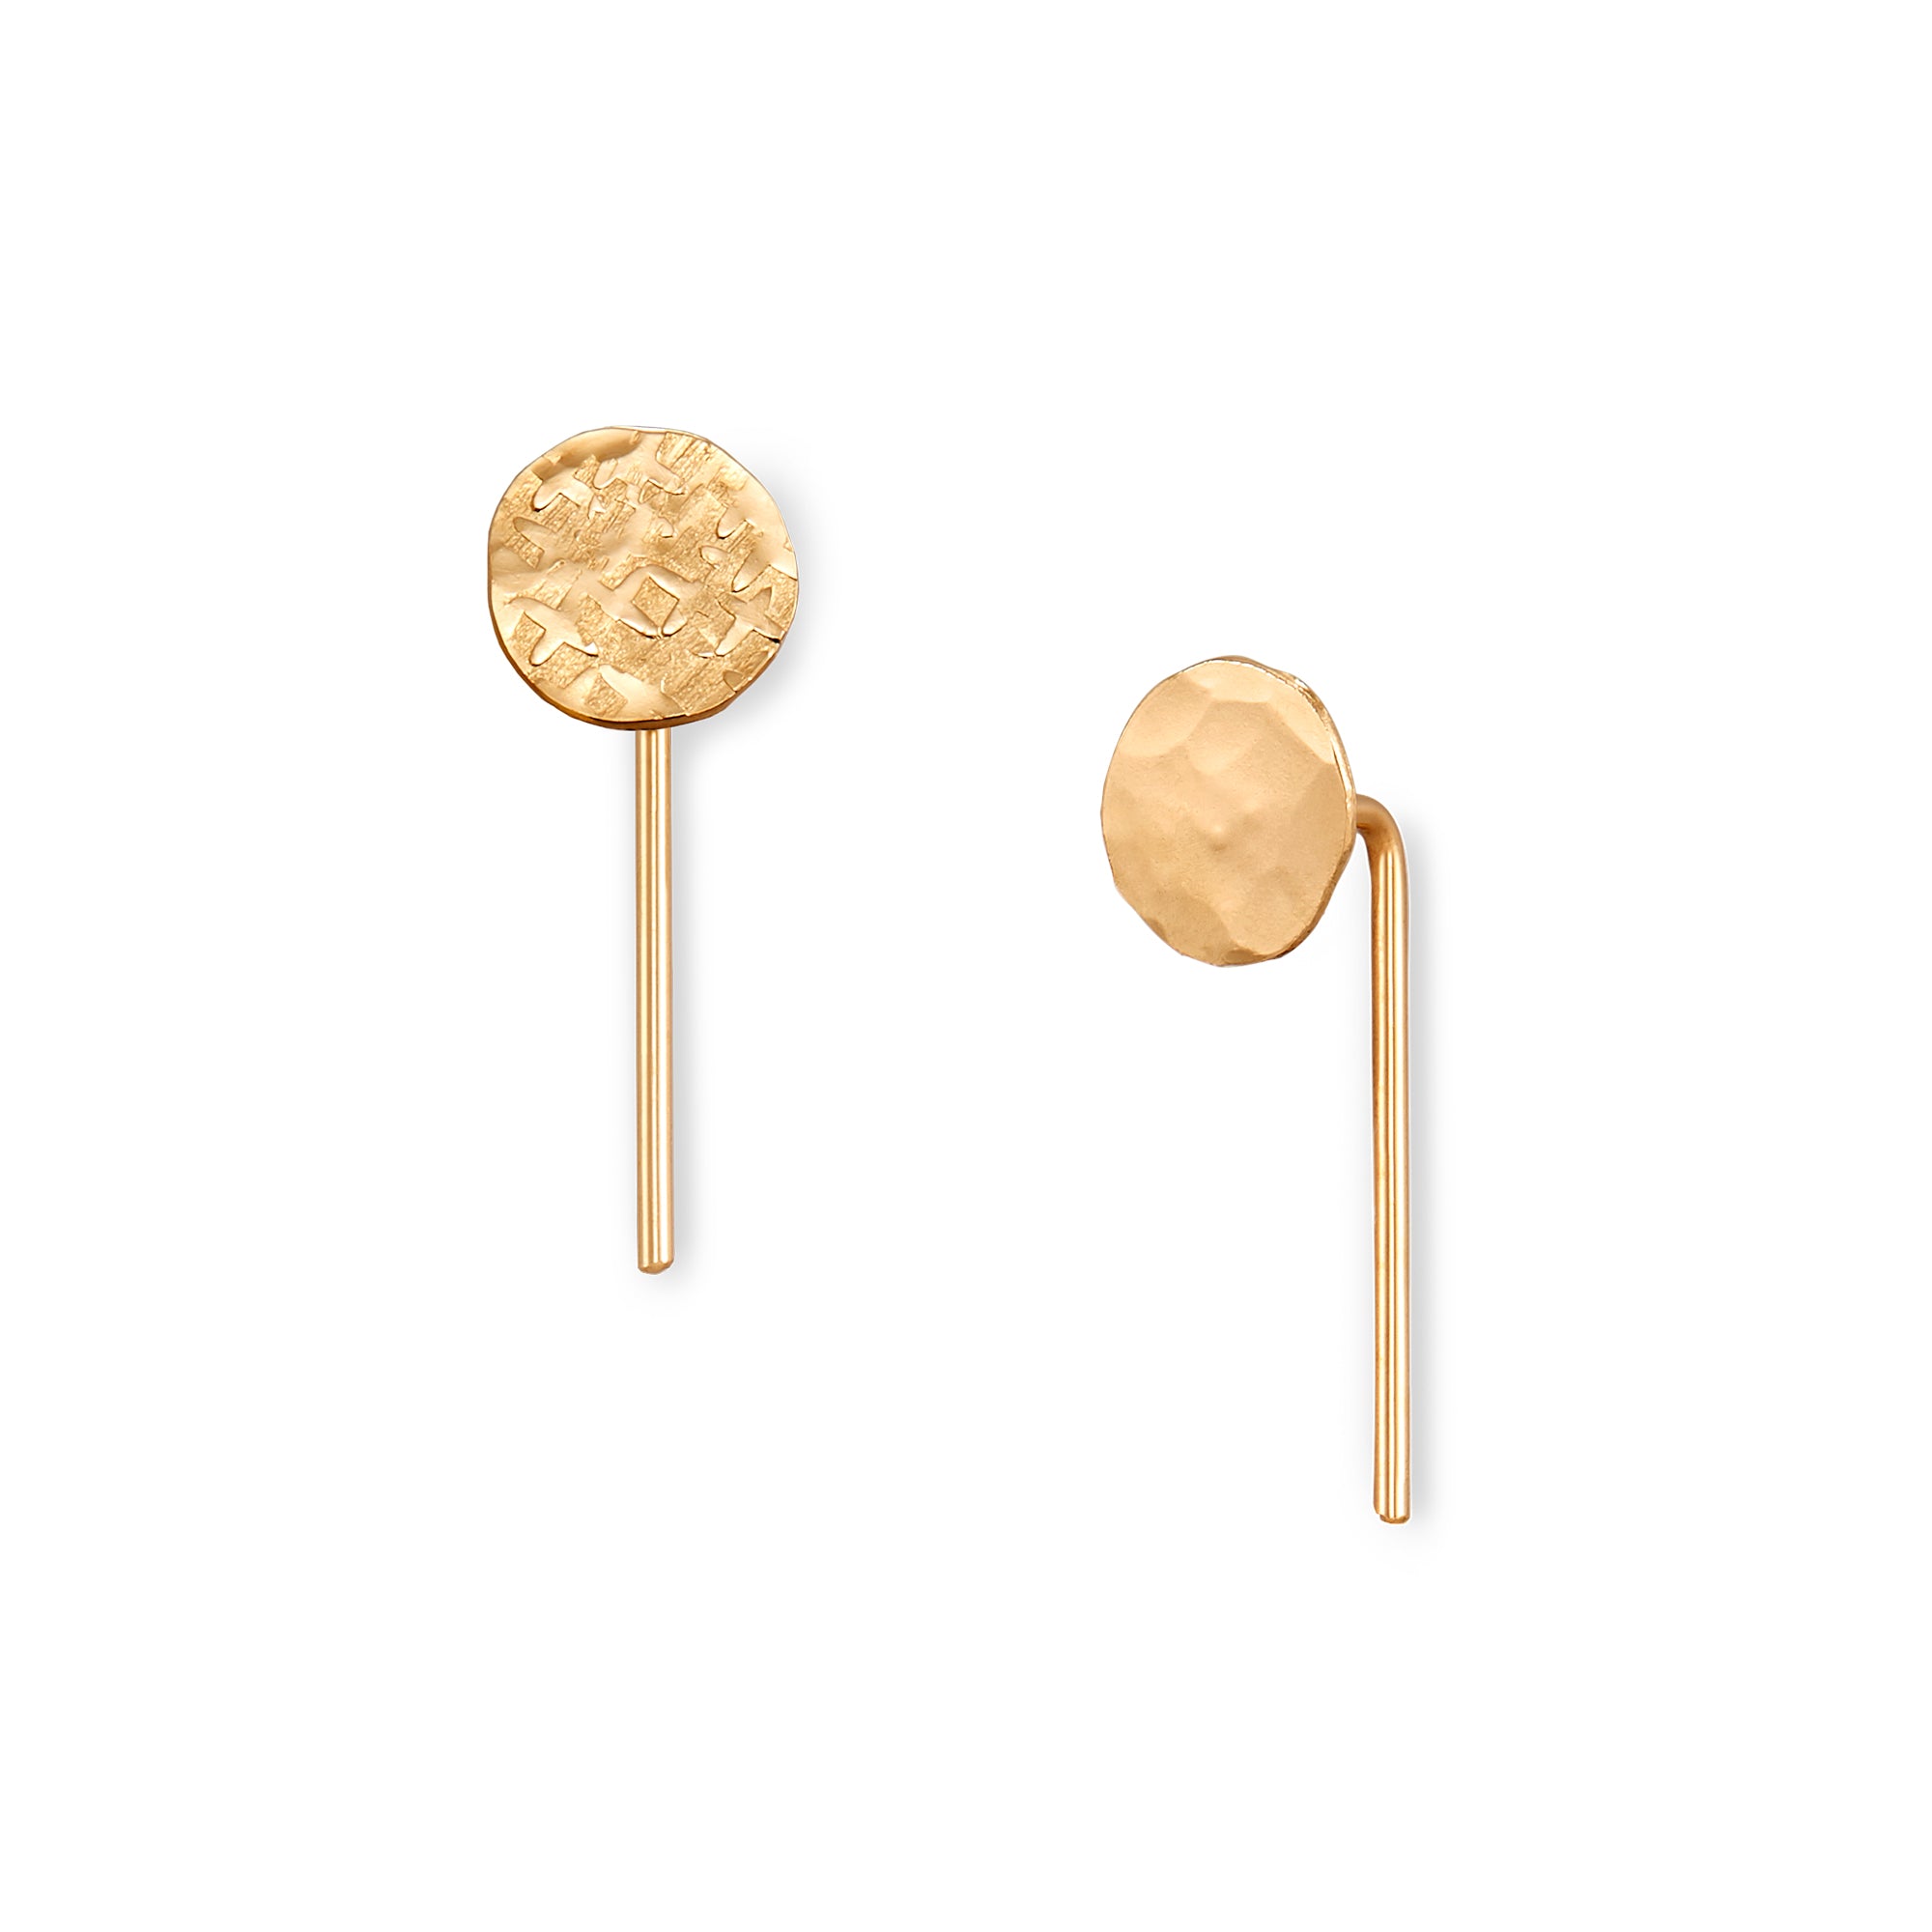 The Disc Hook, modern simplicity in 14k gold with your choice of classic hammered textured or nugget texture